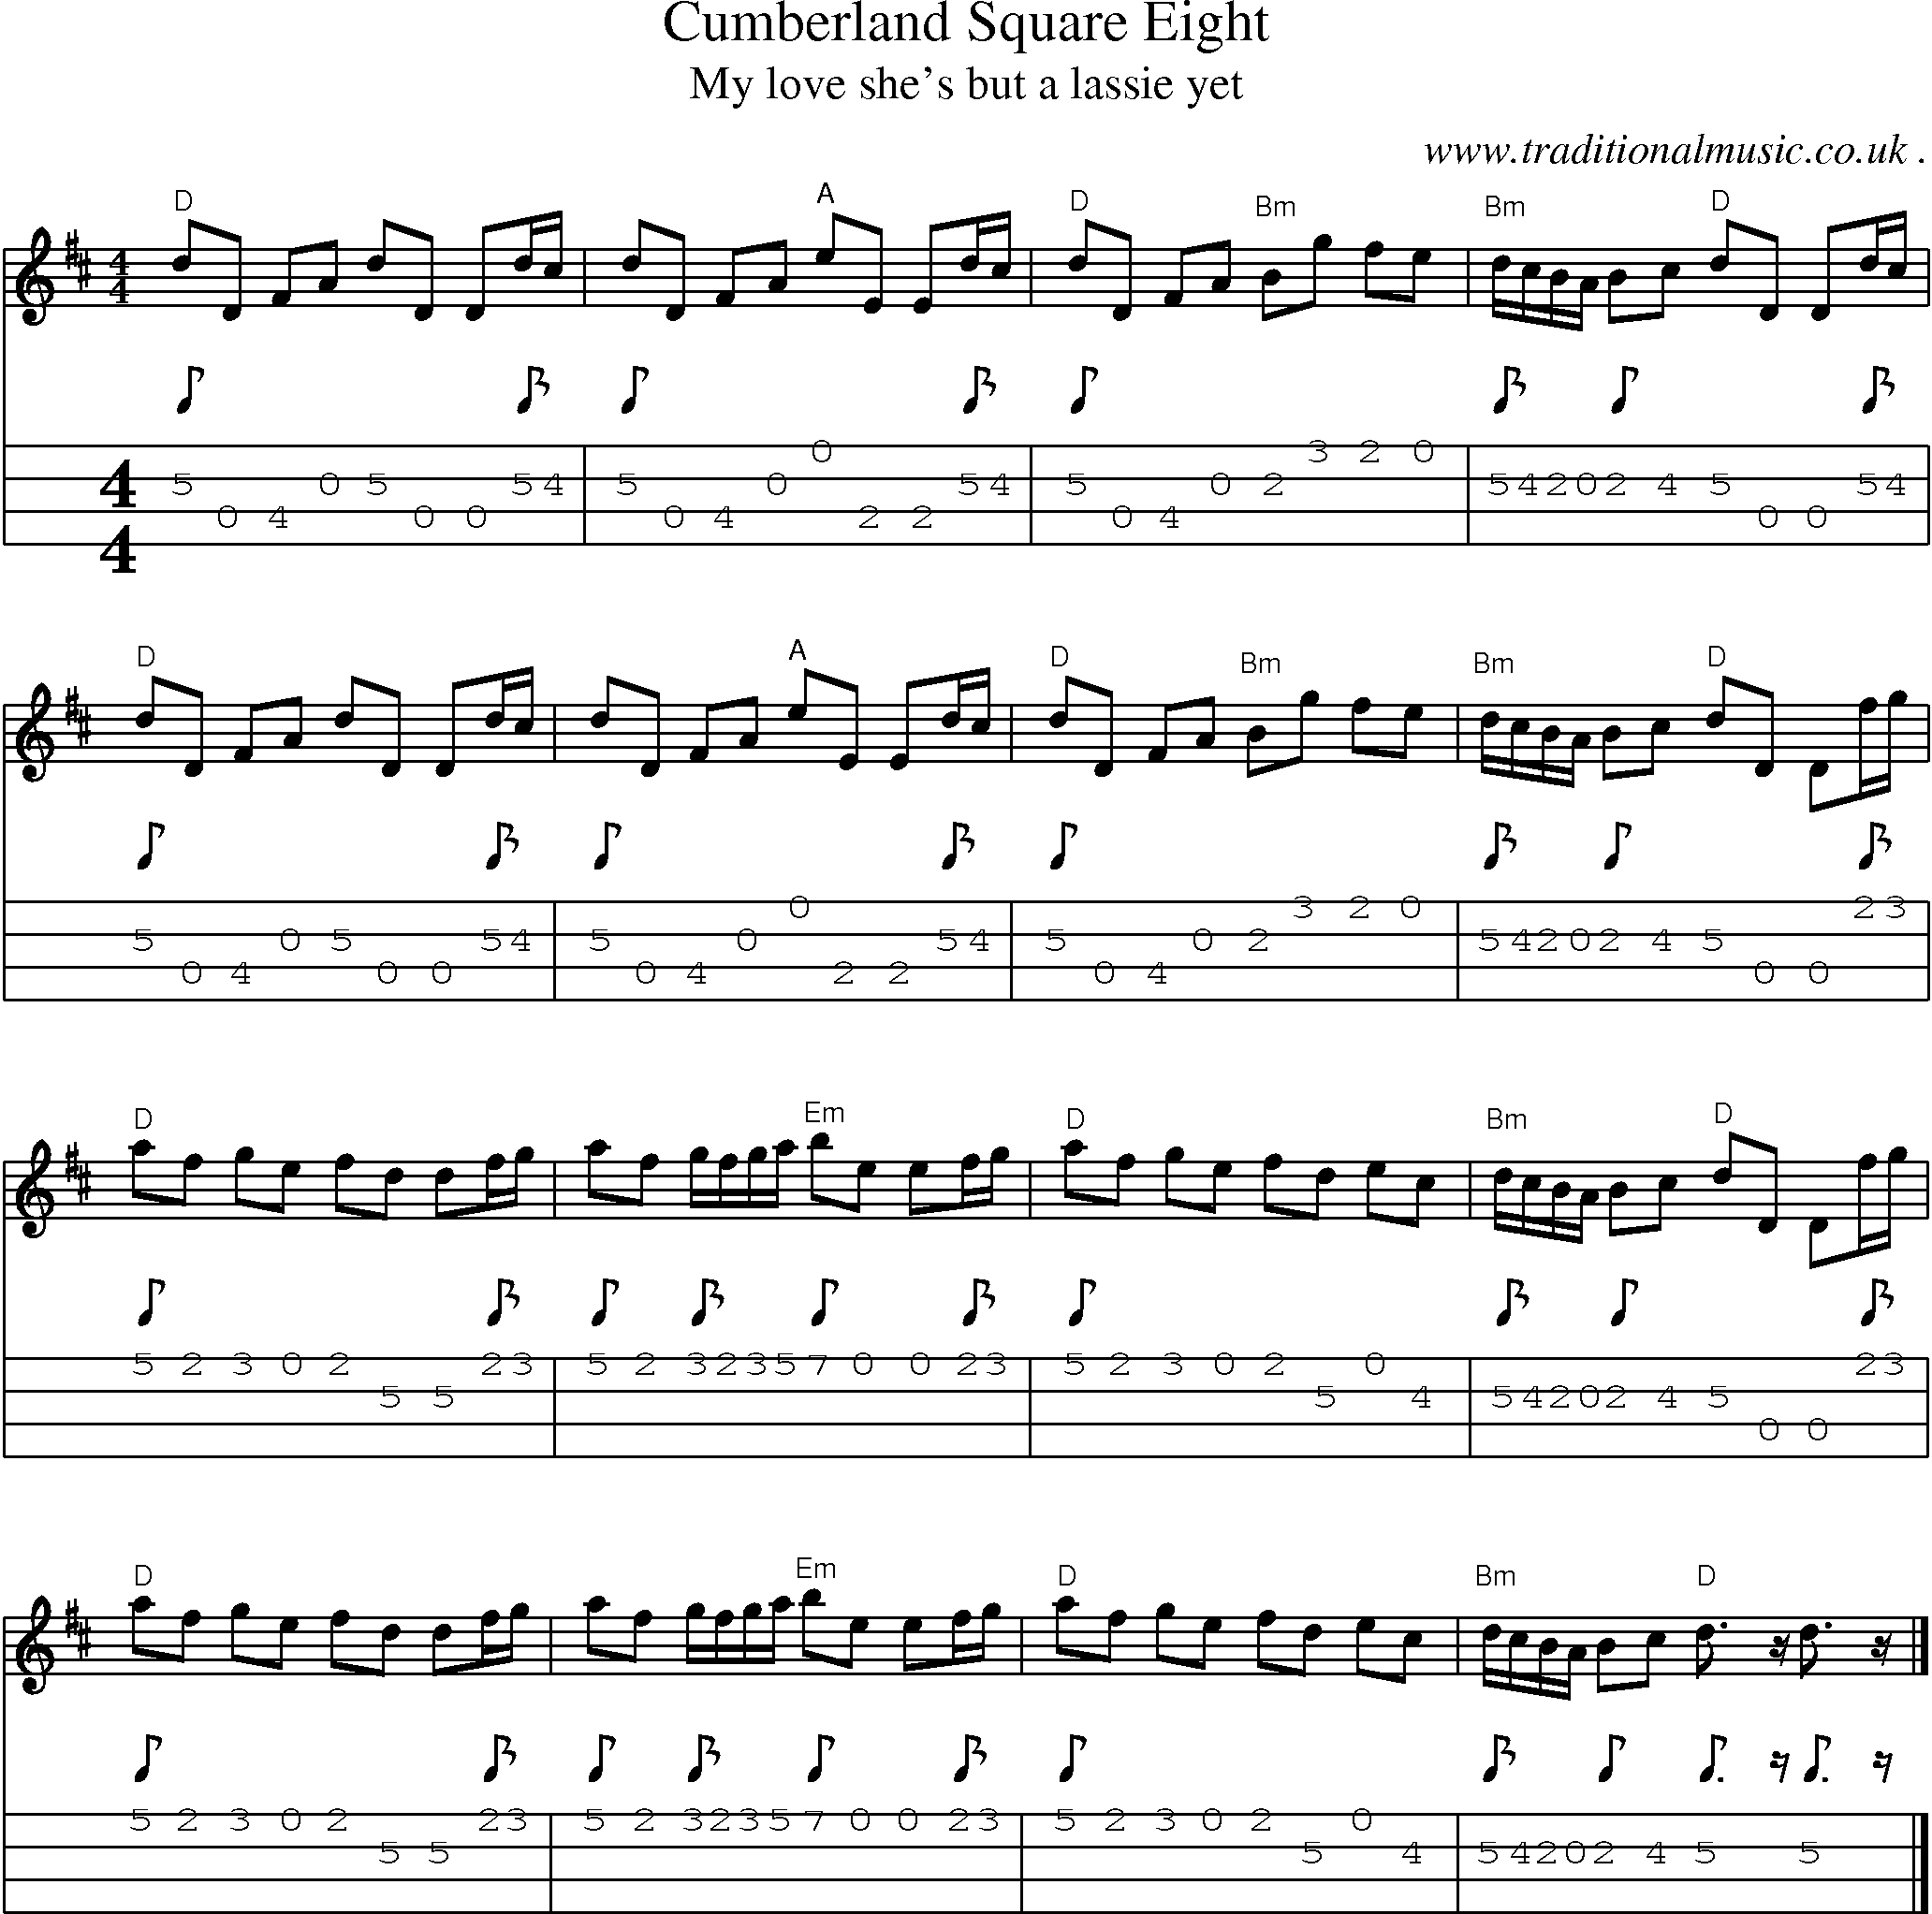 Music Score and Guitar Tabs for Cumberland Square Eight